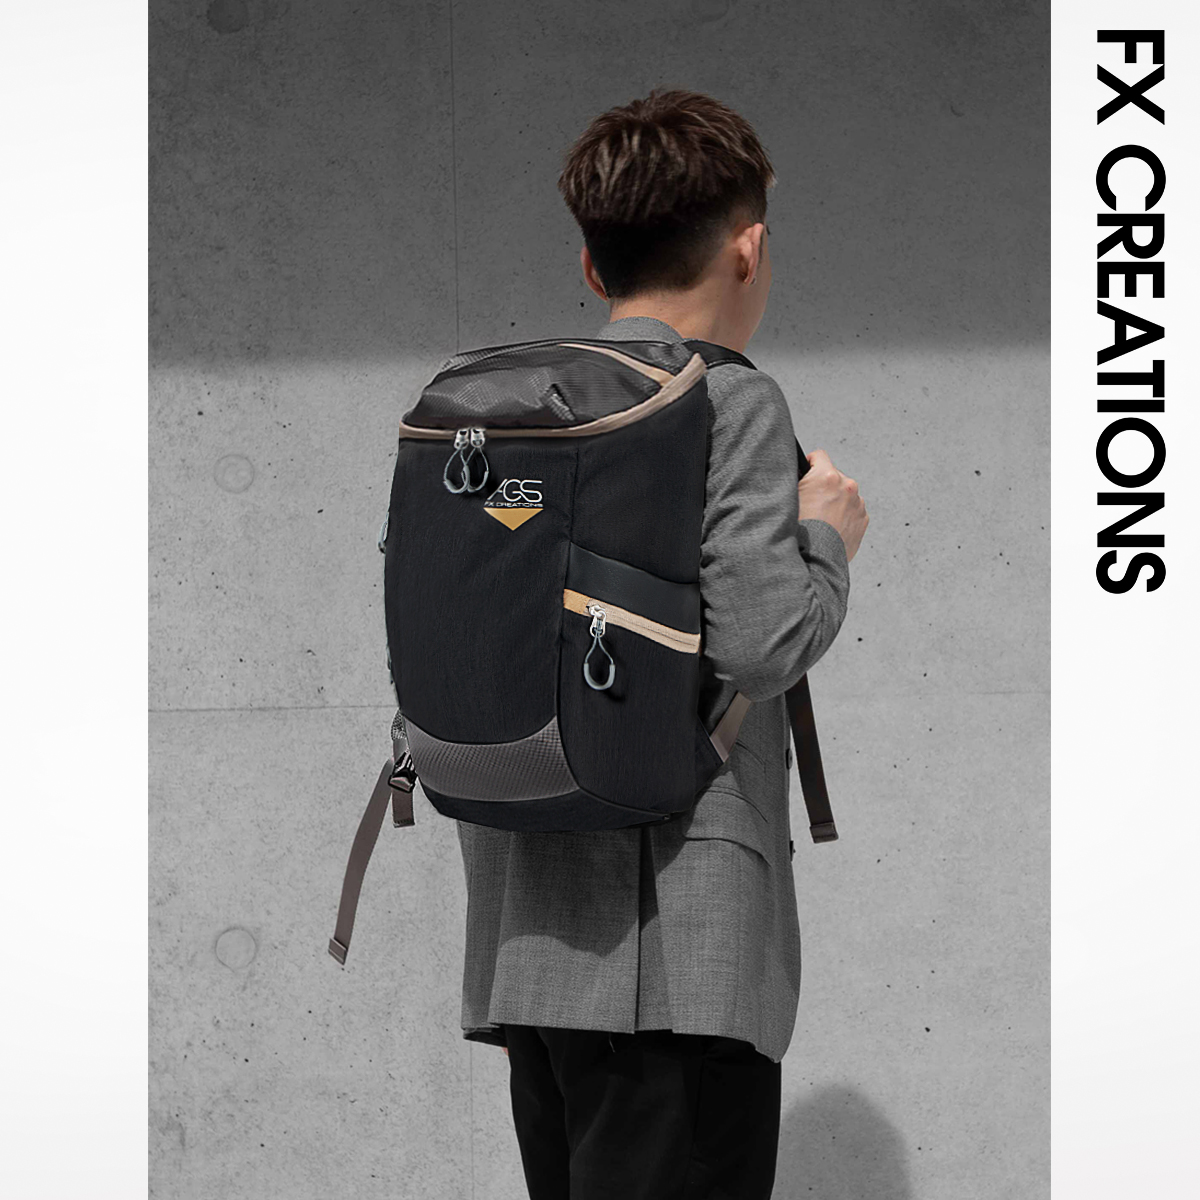 FX Creations EVA Test Type-01 AGS Pro Backpack: Perfect For Roaming The  Post-Apocalyptic Wasteland - SHOUTS